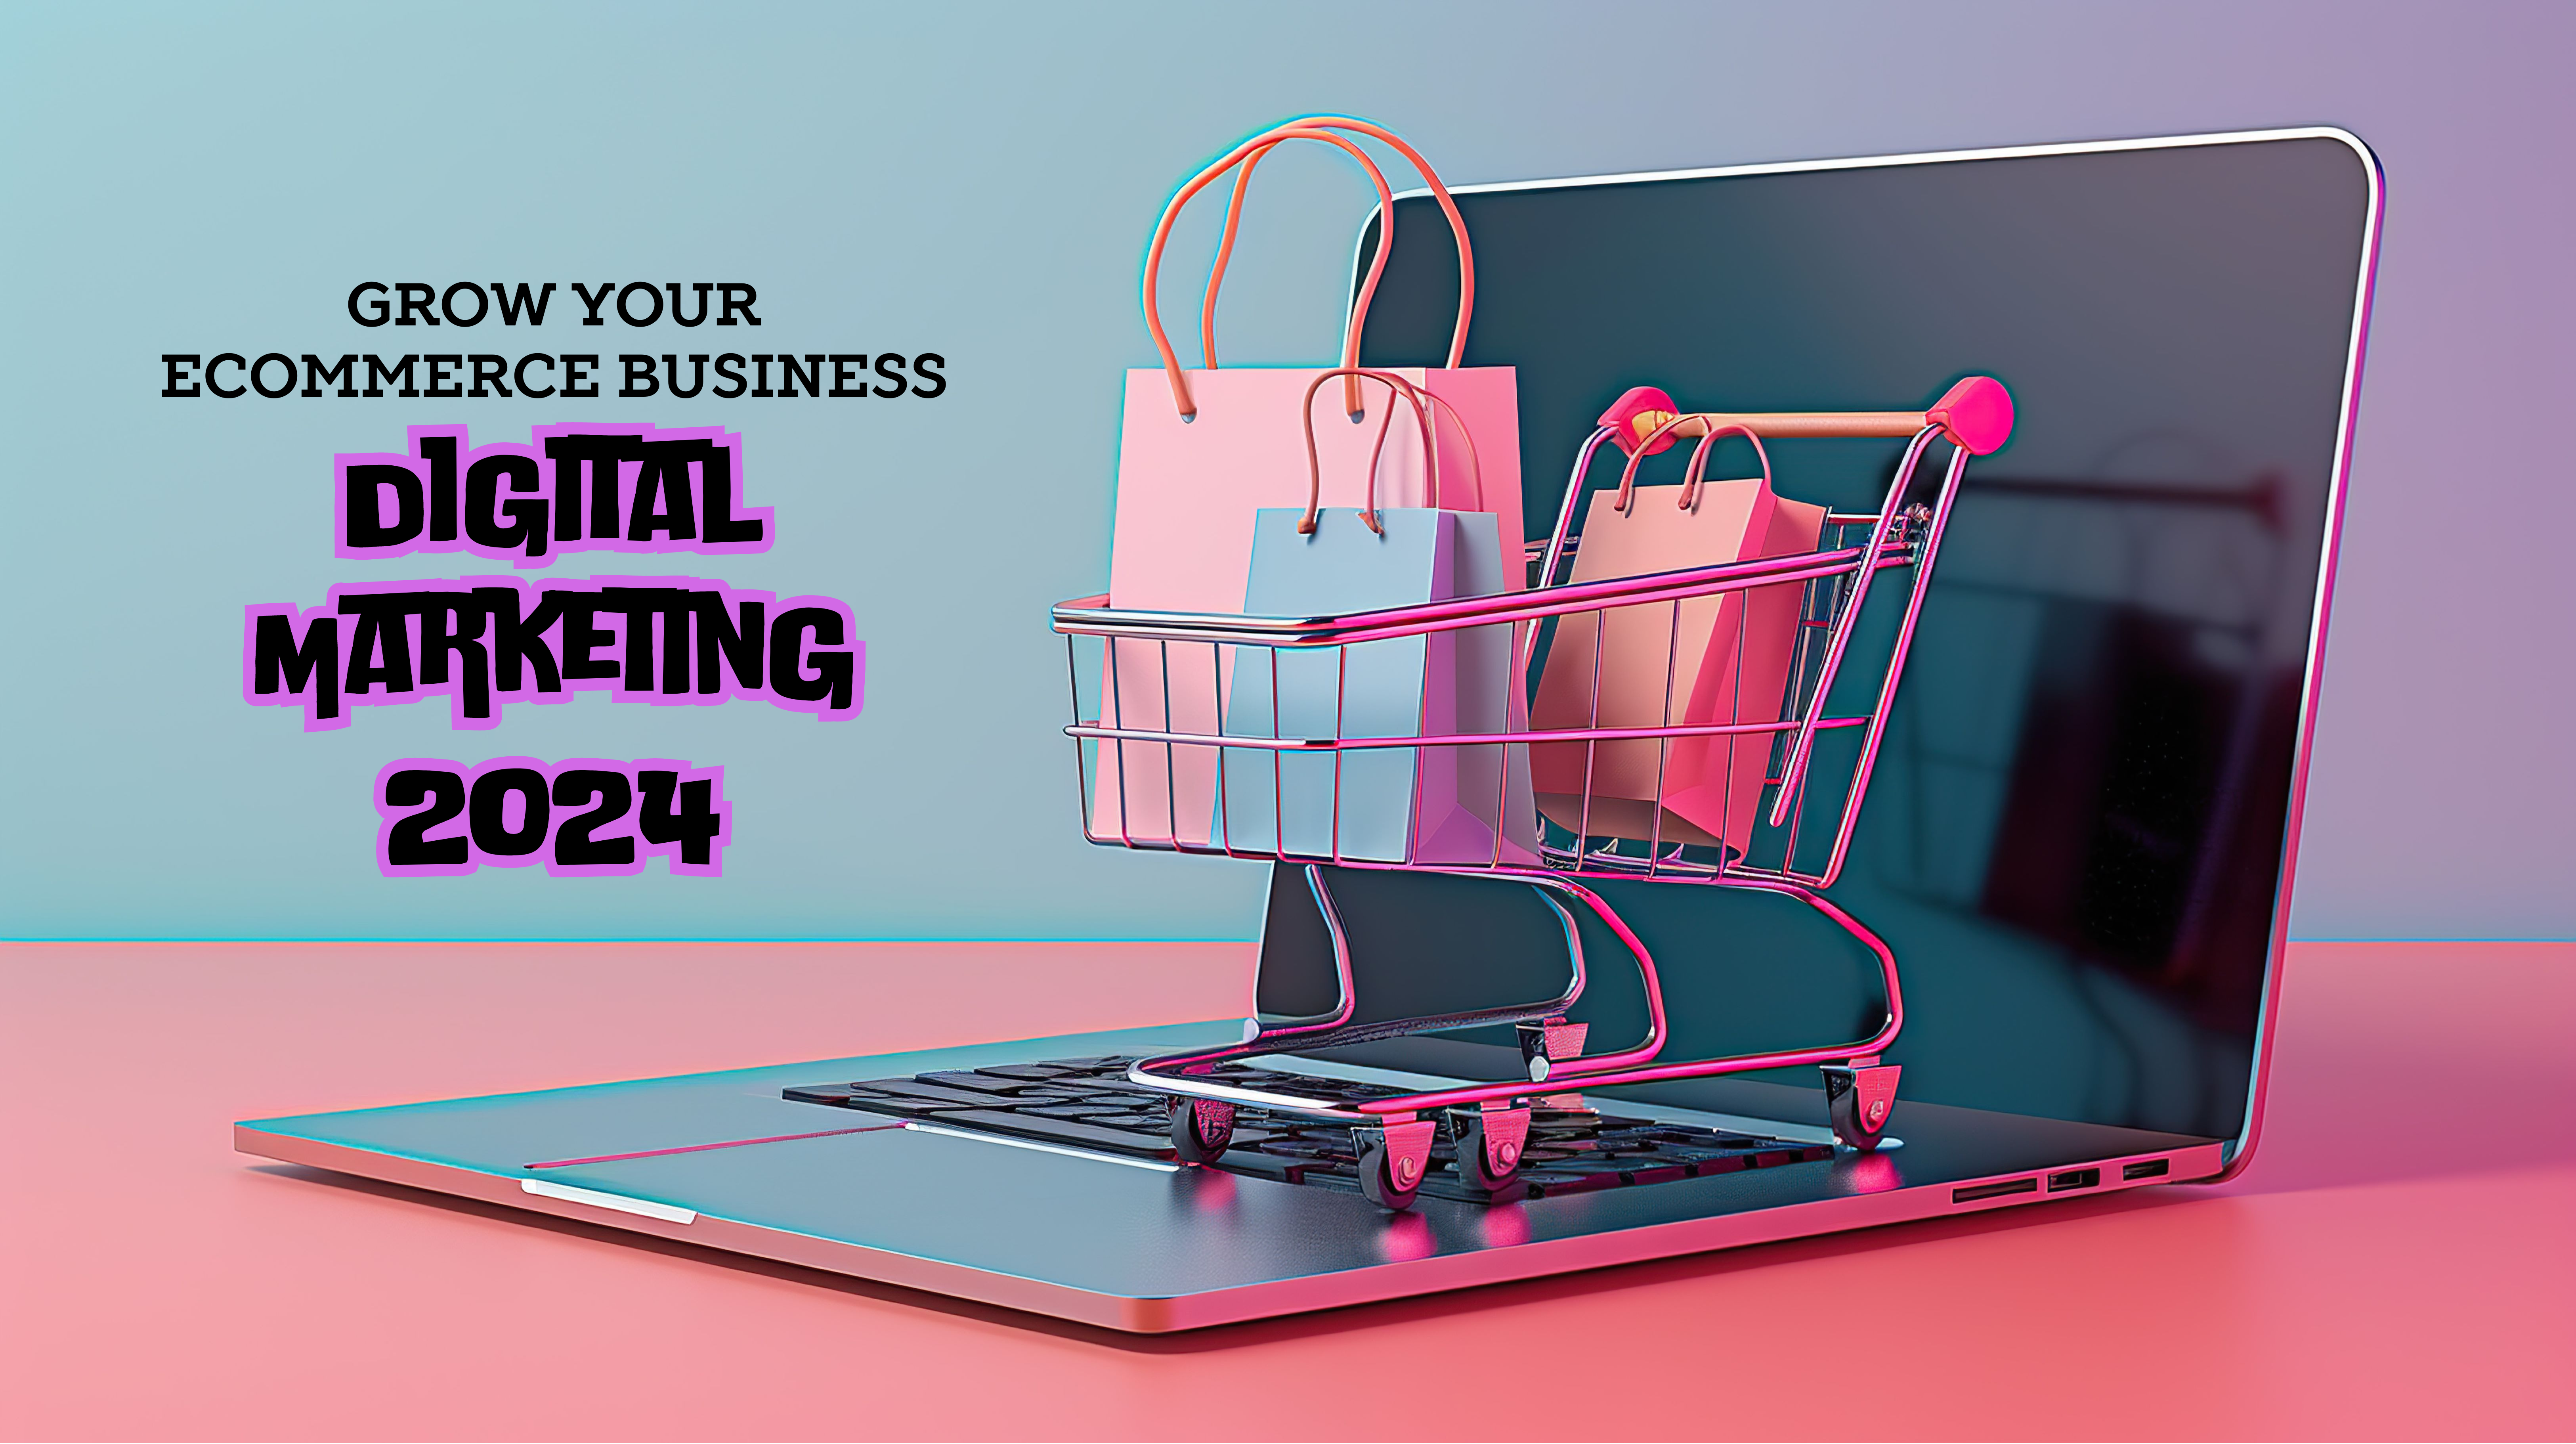 Grow Your Ecommerce Business with Digital Marketing in 2024